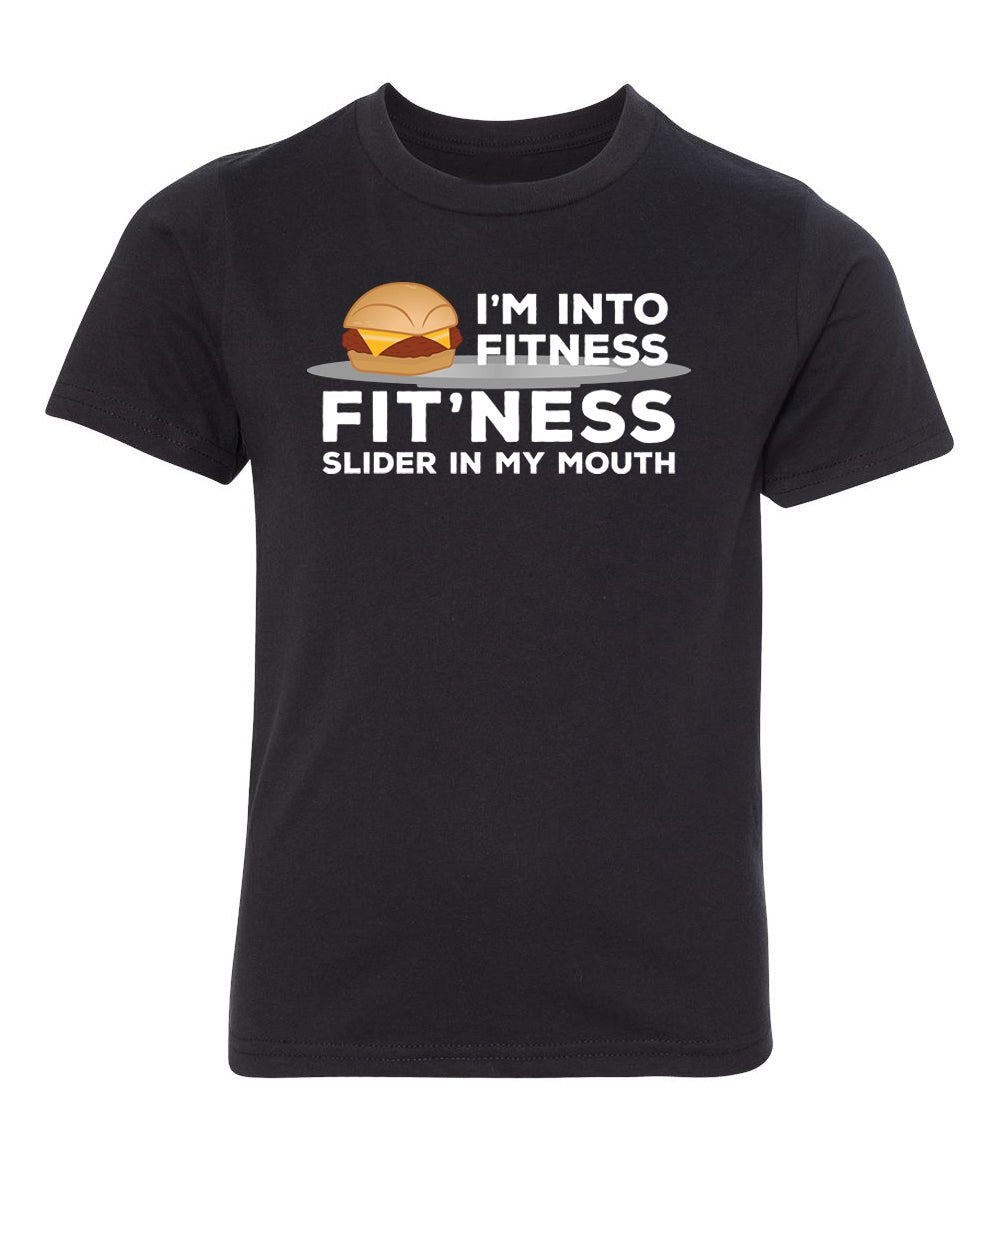 I'm Into Fitness - Fit'ness Slider in My Mouth - Kids T Shirts - Mato & Hash